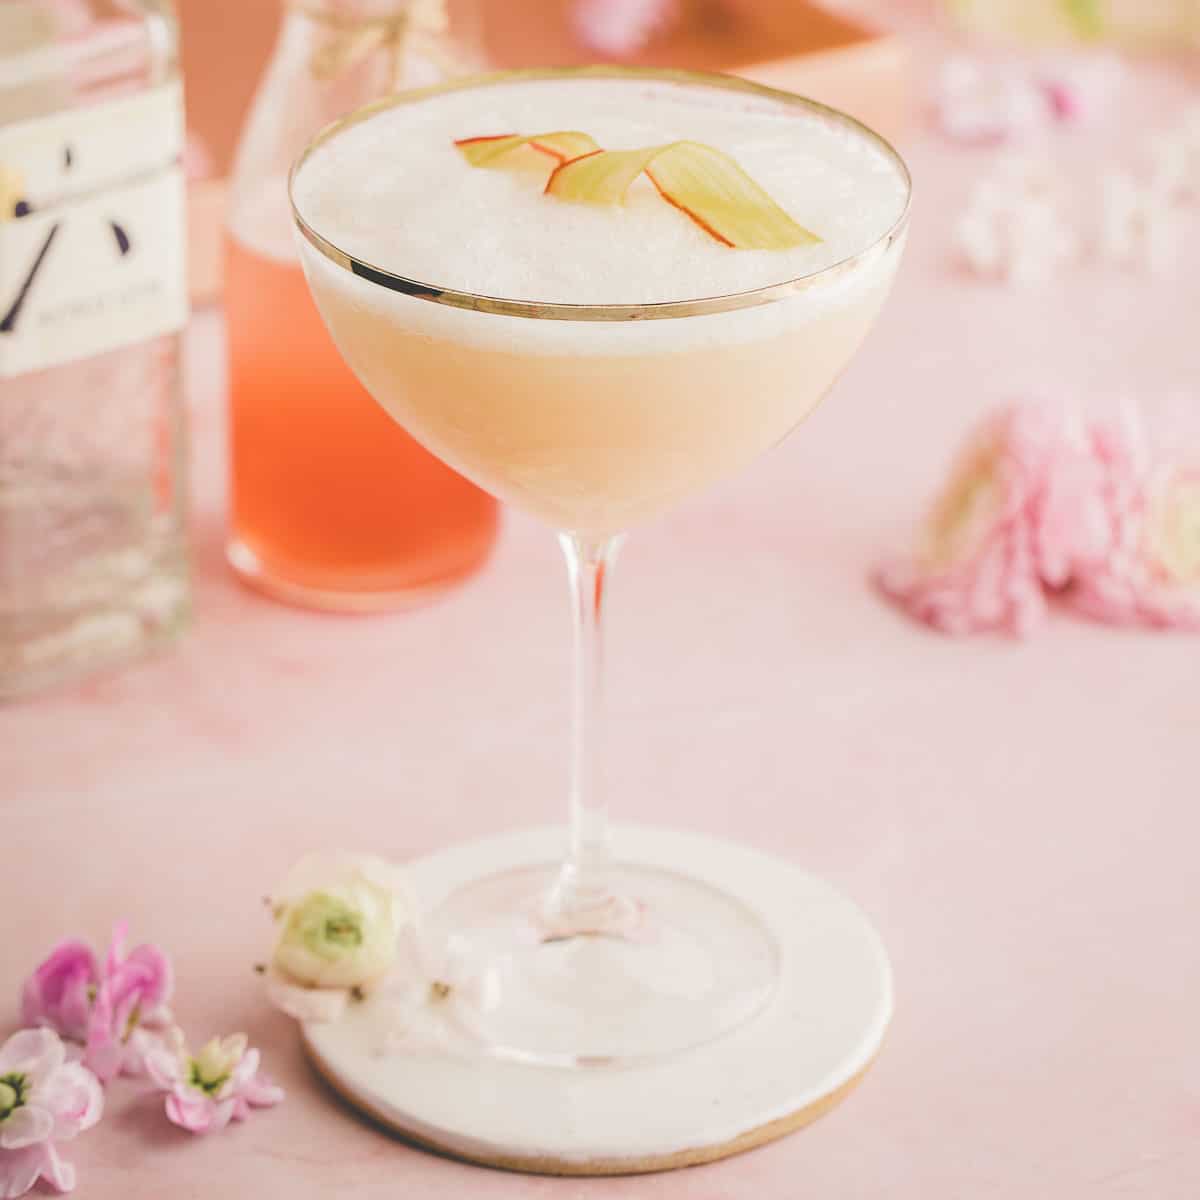 A cocktail glass with a silver rim, containing a pink rhubarb cocktail drink, garnished with a candied rhubarb ribbon. On a pink surface, surrounded by pink flowers and a bottle of rhubarb syrup. 